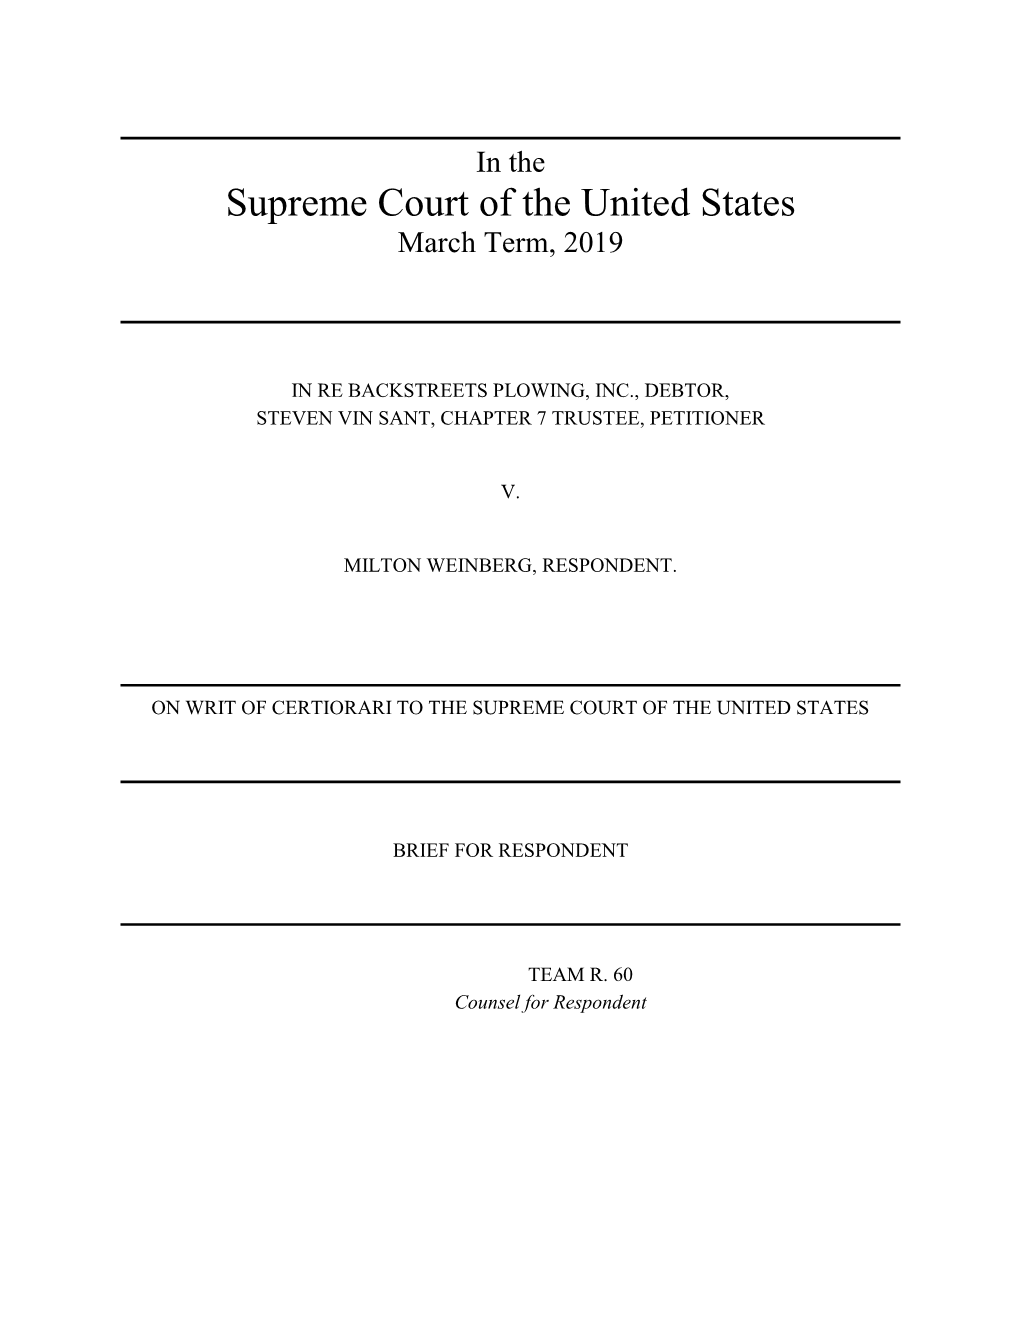 Supreme Court of the United States March Term, 2019